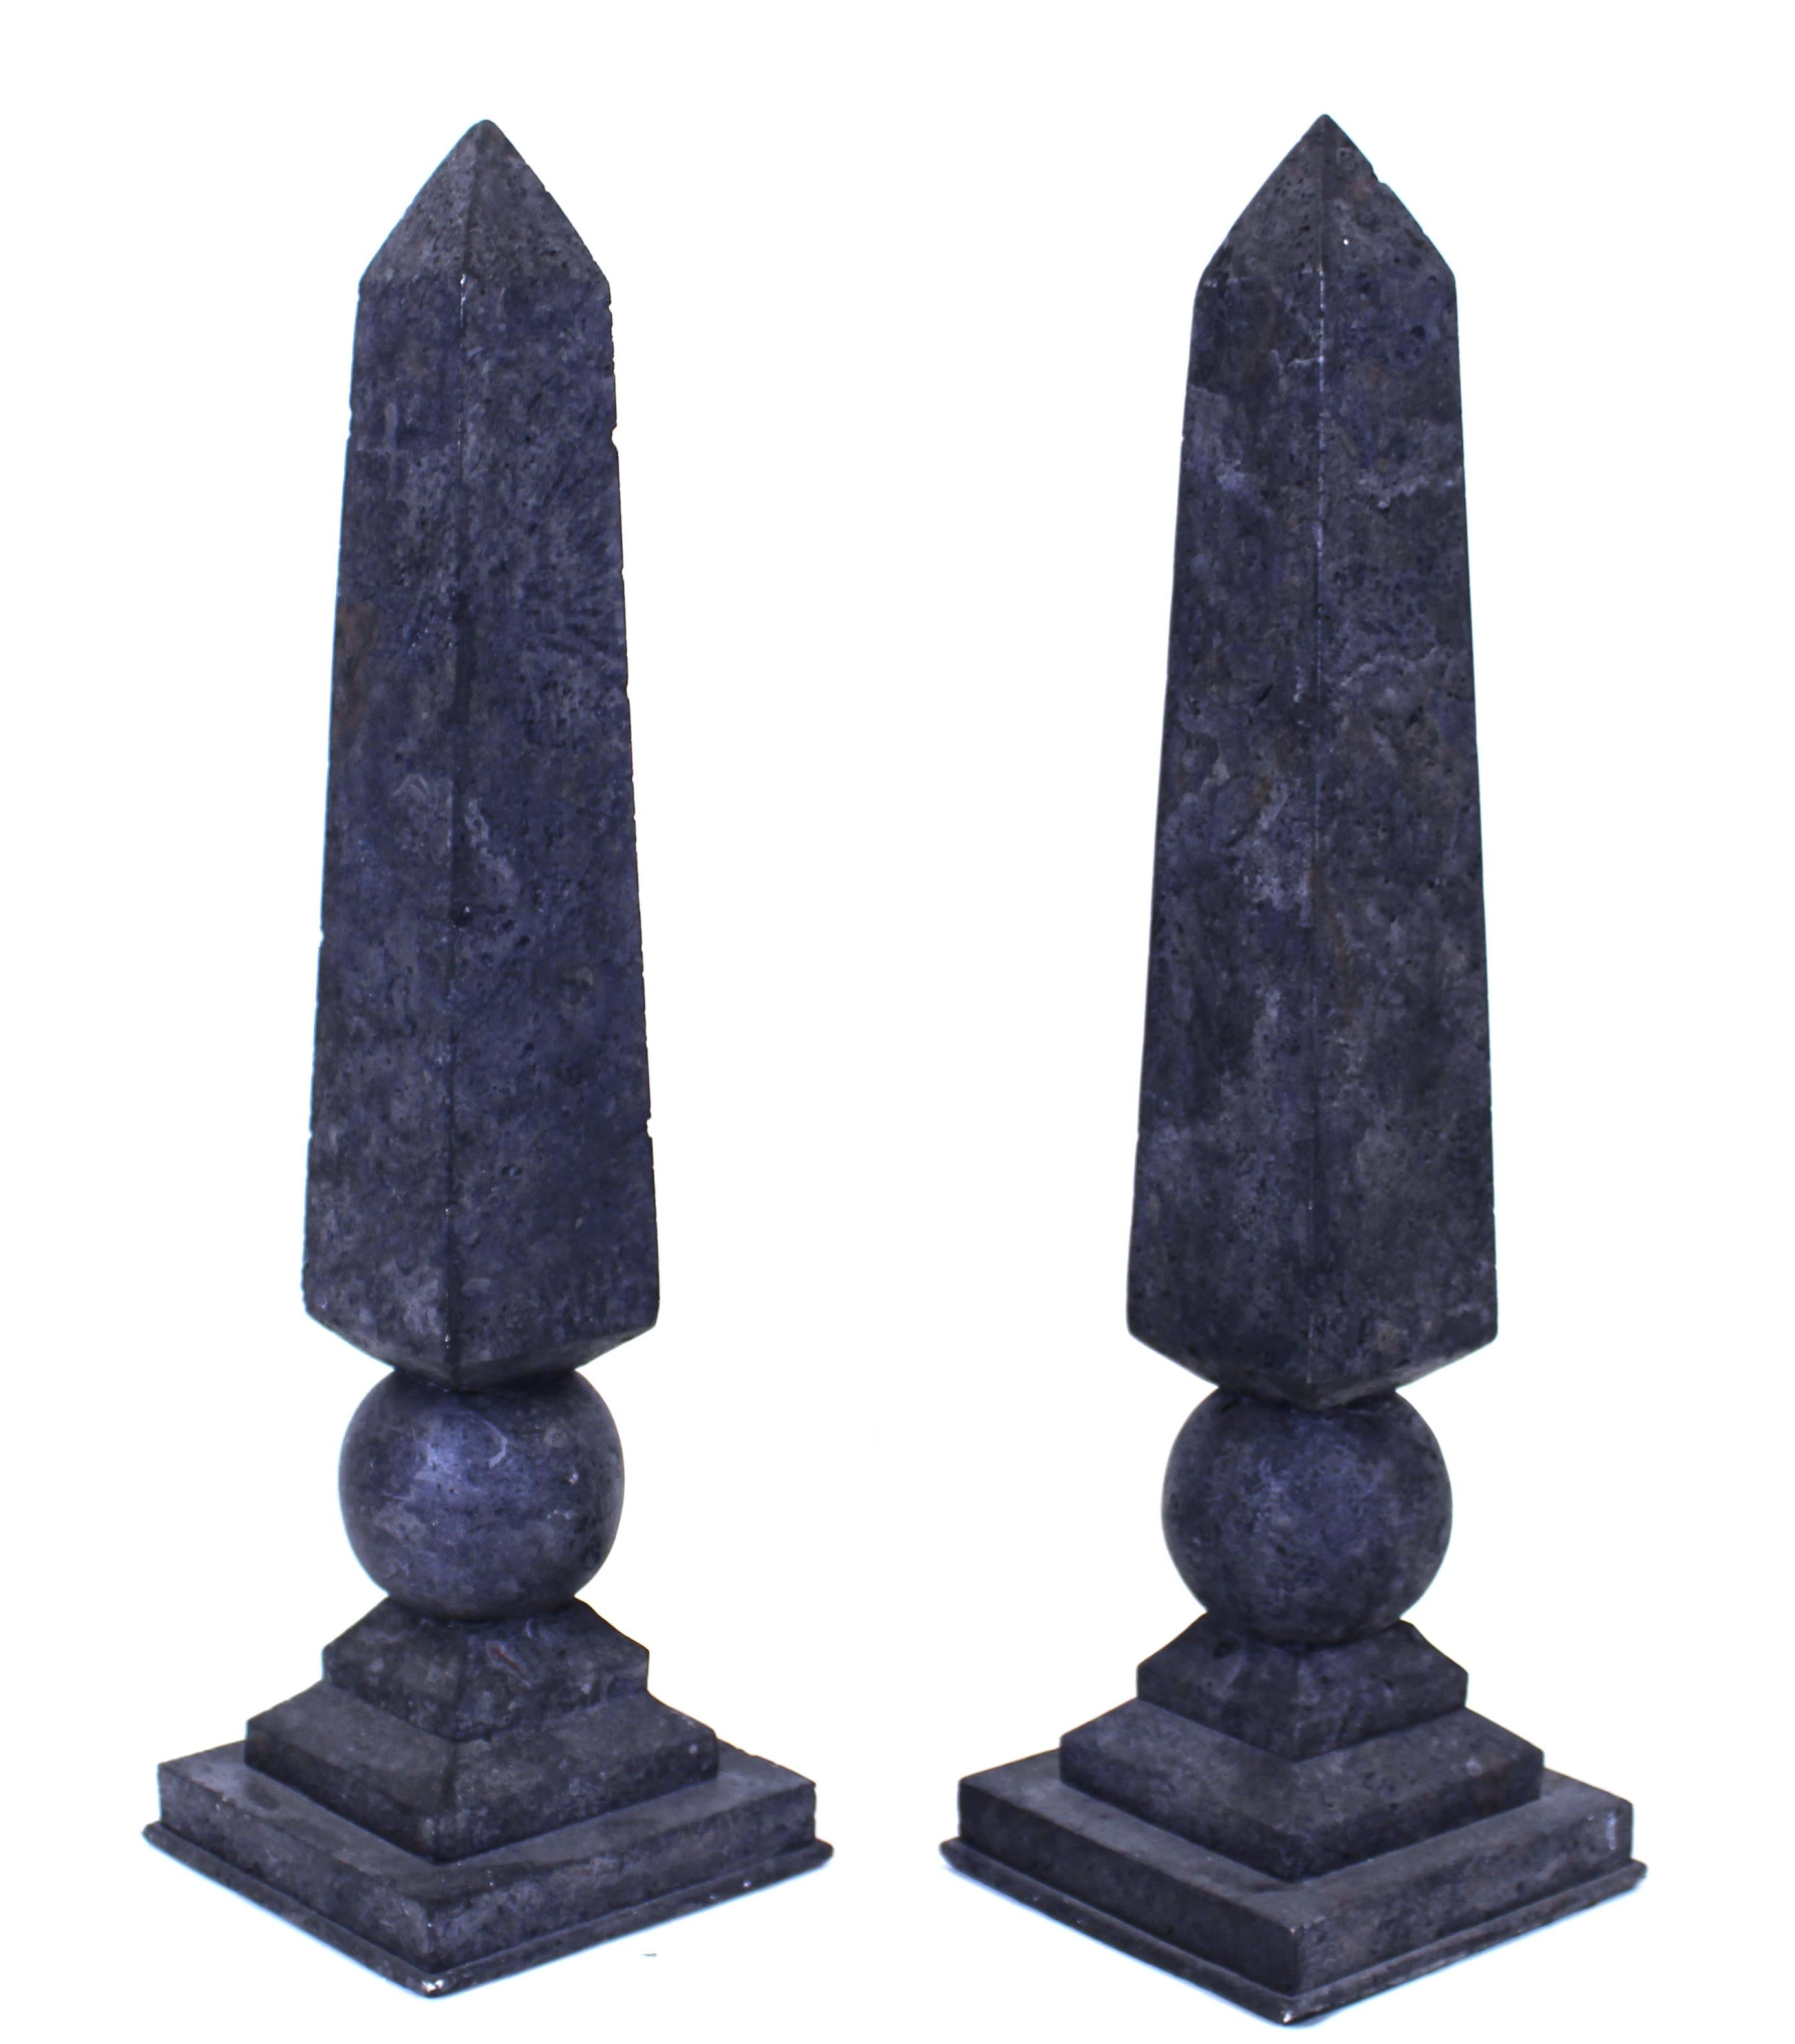 Neoclassical revival style pair of cast resin obelisks atop spheres and stepped square bases. Measures: 20